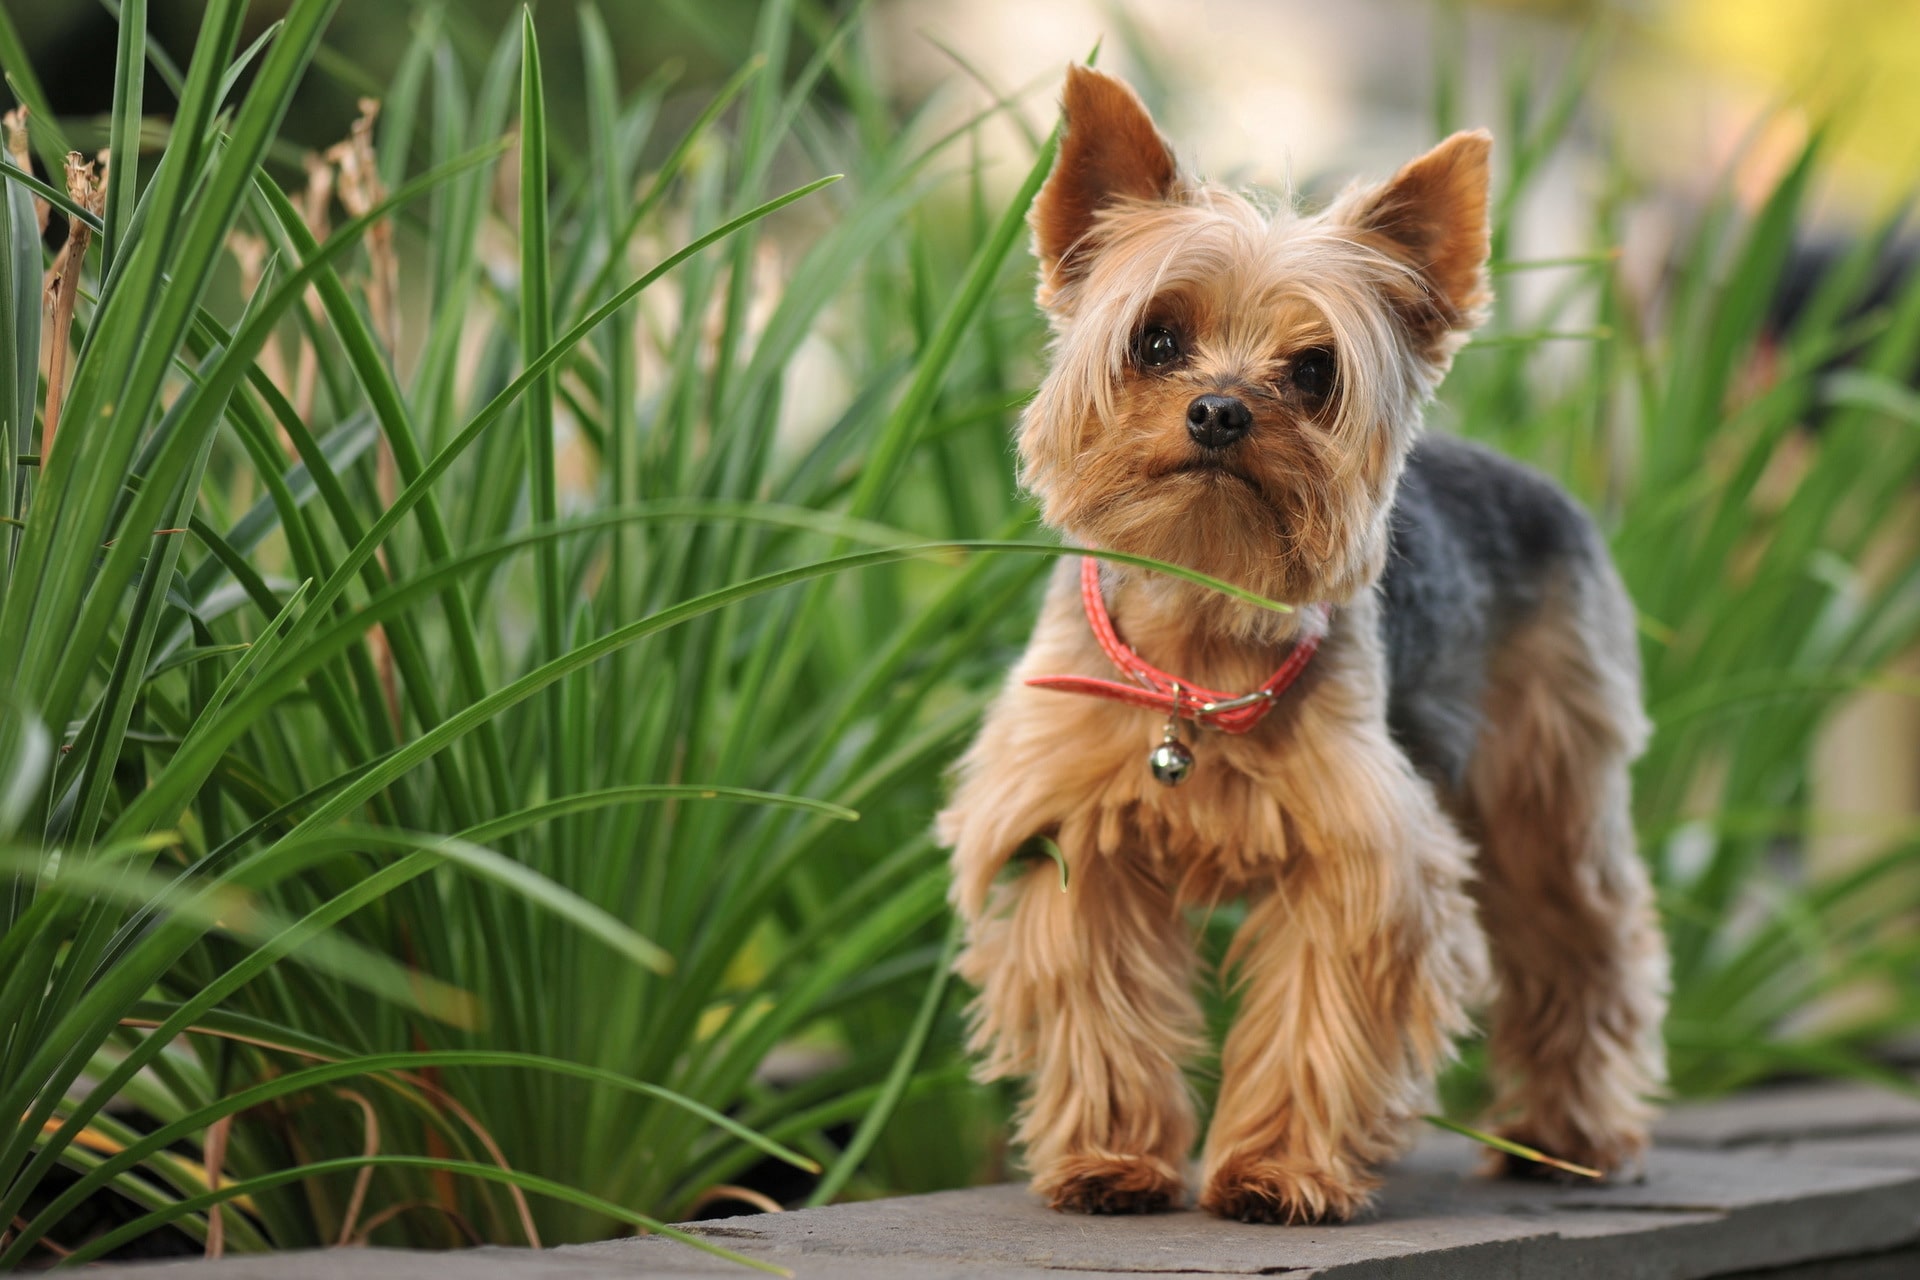 Silky Terrier Backgrounds, Compatible - PC, Mobile, Gadgets| 1920x1280 px